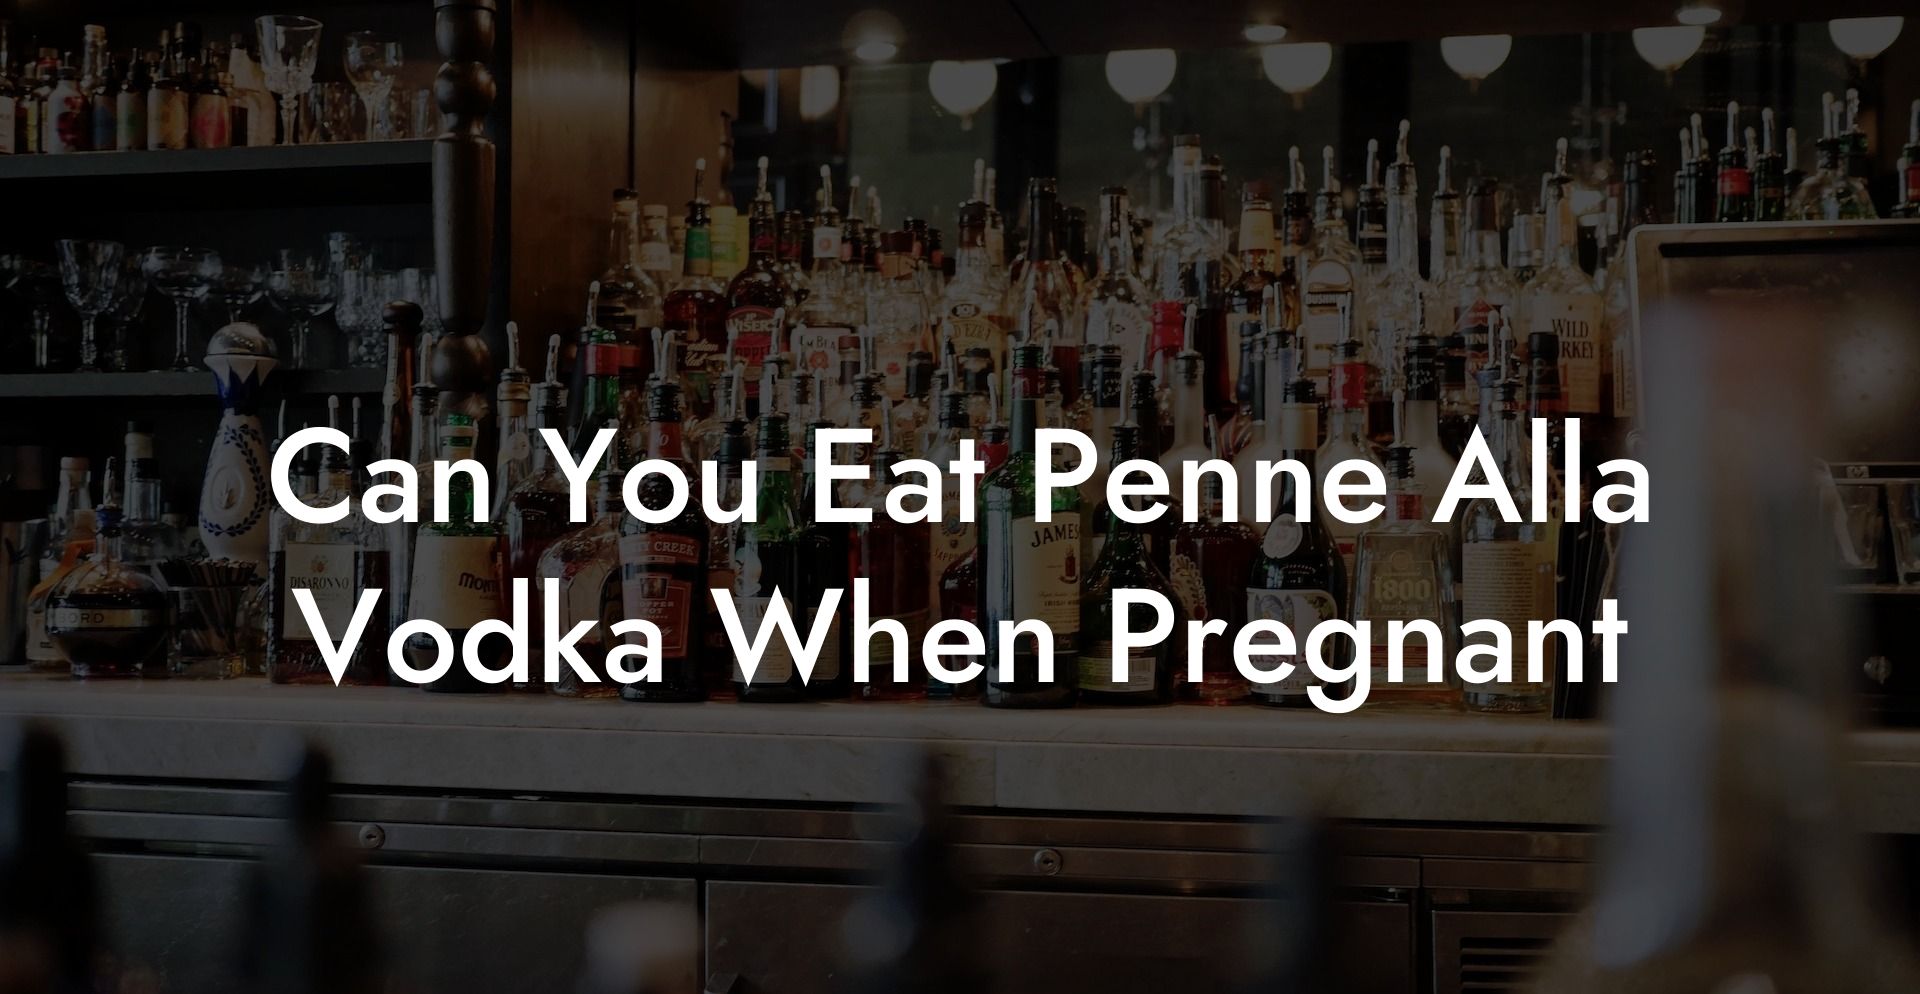 Can You Eat Penne Alla Vodka When Pregnant